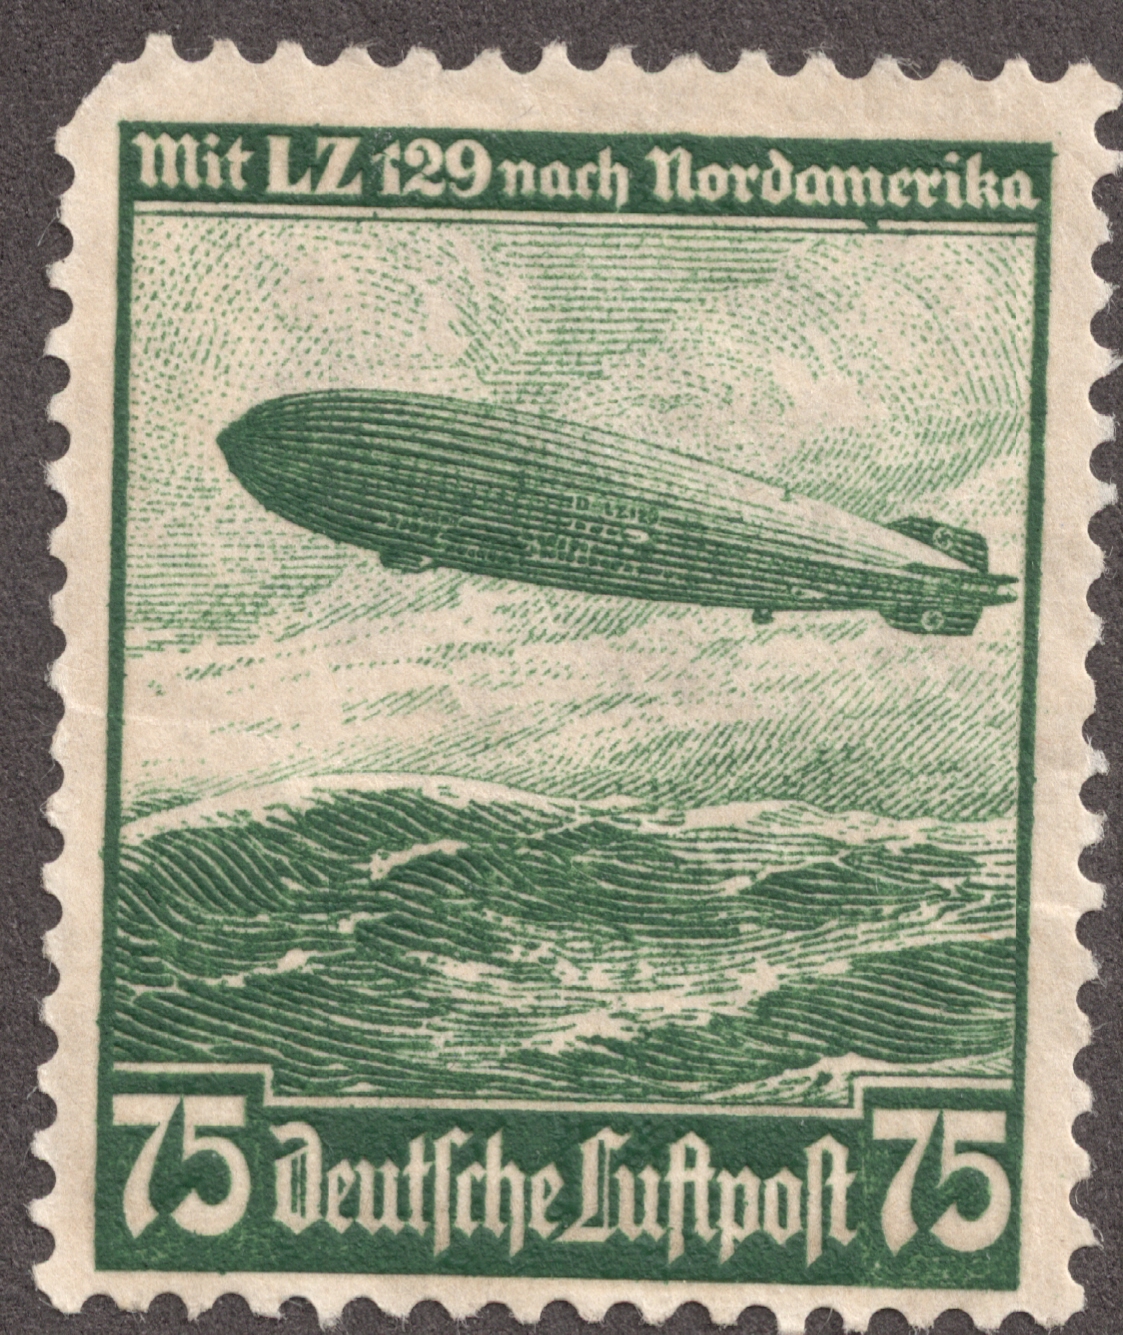 #18 selectable by Angel Shipping Rhineland Details about   3 CDC BLACK DUN #14 show original title 